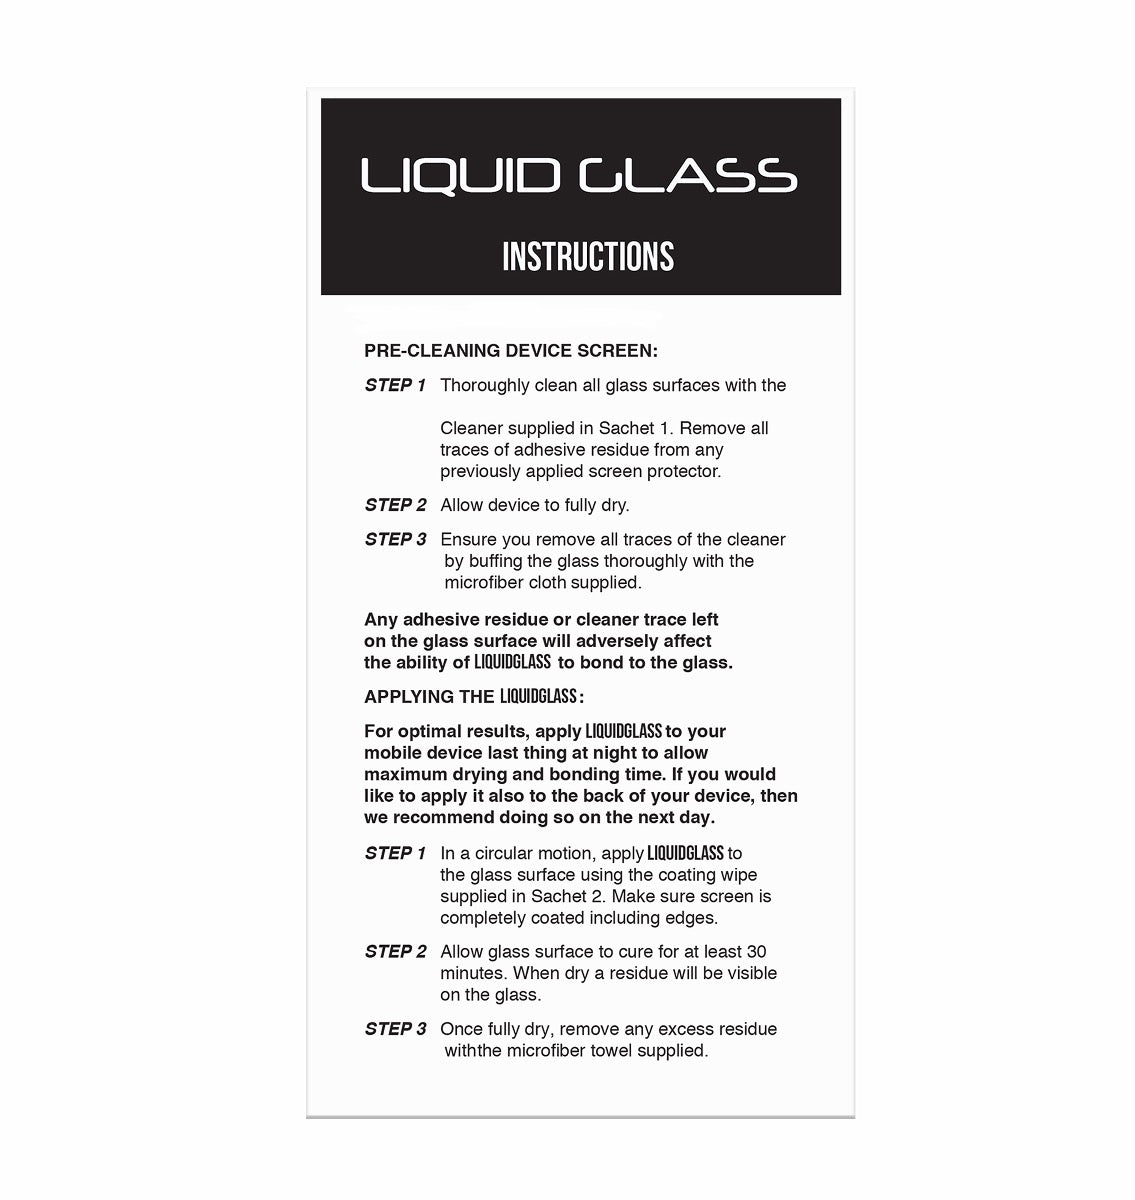 Liquid Glass Screen Protector with $150 Screen Protection for Apple Watch